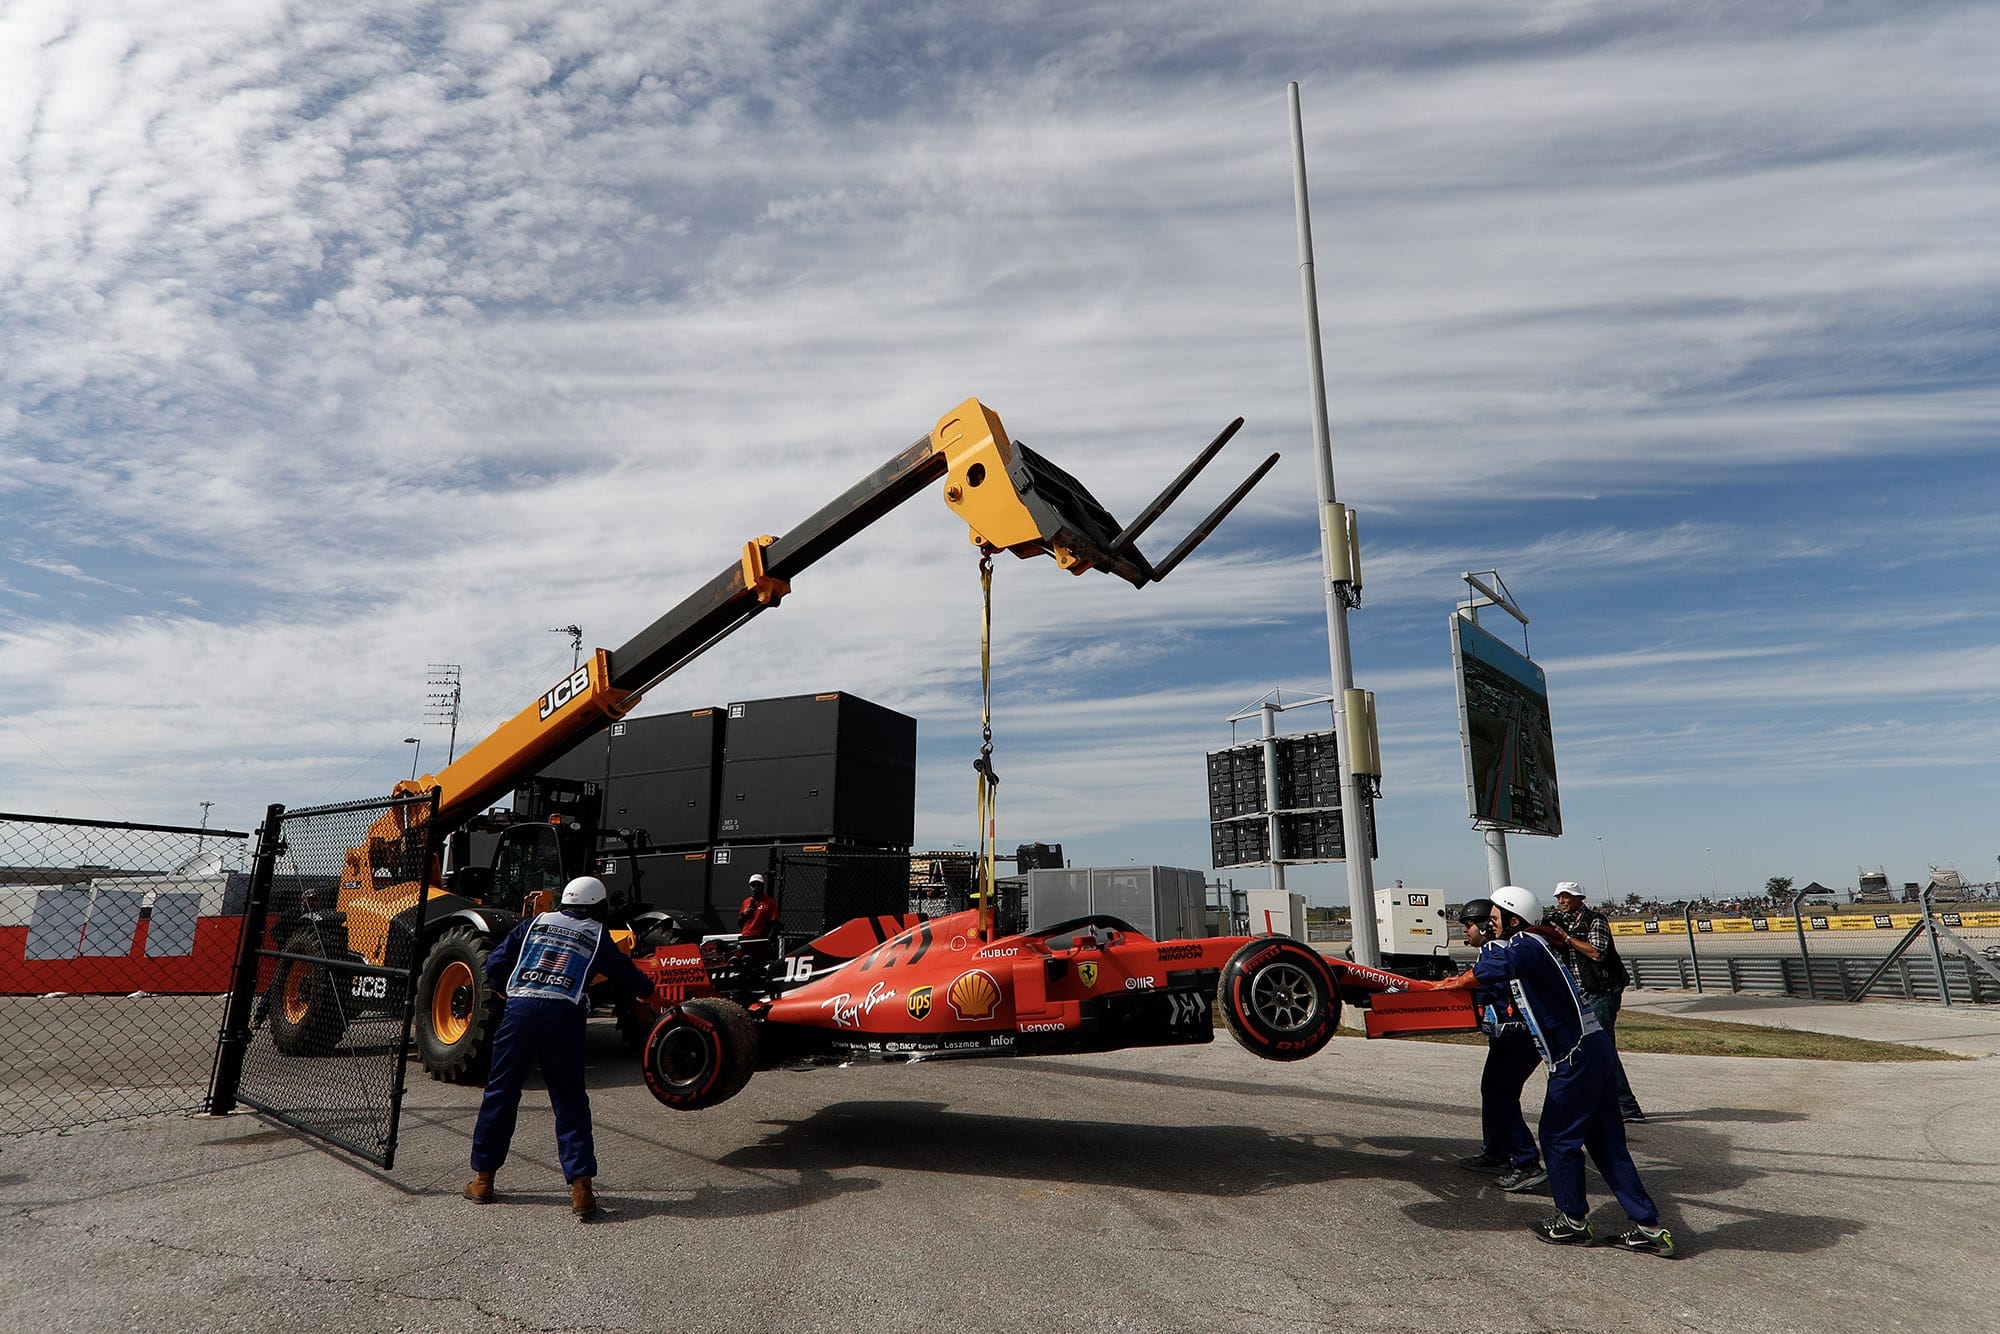 Charles Leclerc's Ferrari being lifted by a tractor in practice ahead of qualifying for the 2019 US Grand Prix